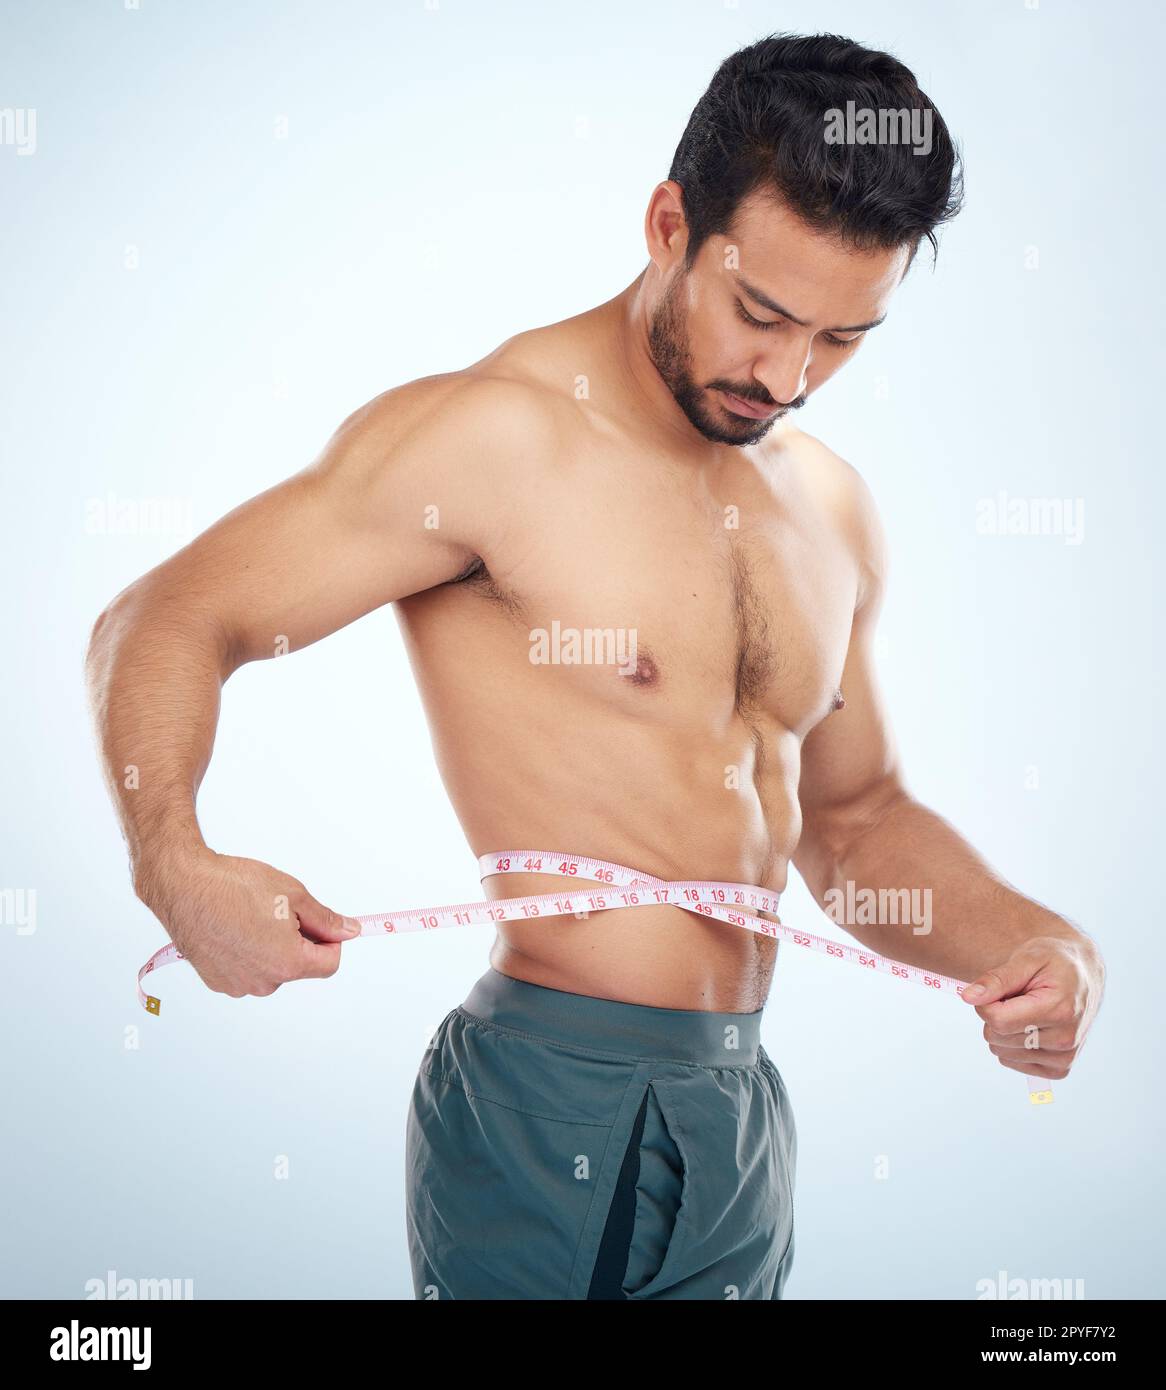 https://c8.alamy.com/comp/2PYF7Y2/man-body-or-measuring-tape-on-waist-on-studio-background-for-weight-loss-management-fat-control-or-bmi-and-diet-wellness-fitness-model-sports-athlete-or-coach-with-tape-measure-for-muscle-goals-2PYF7Y2.jpg